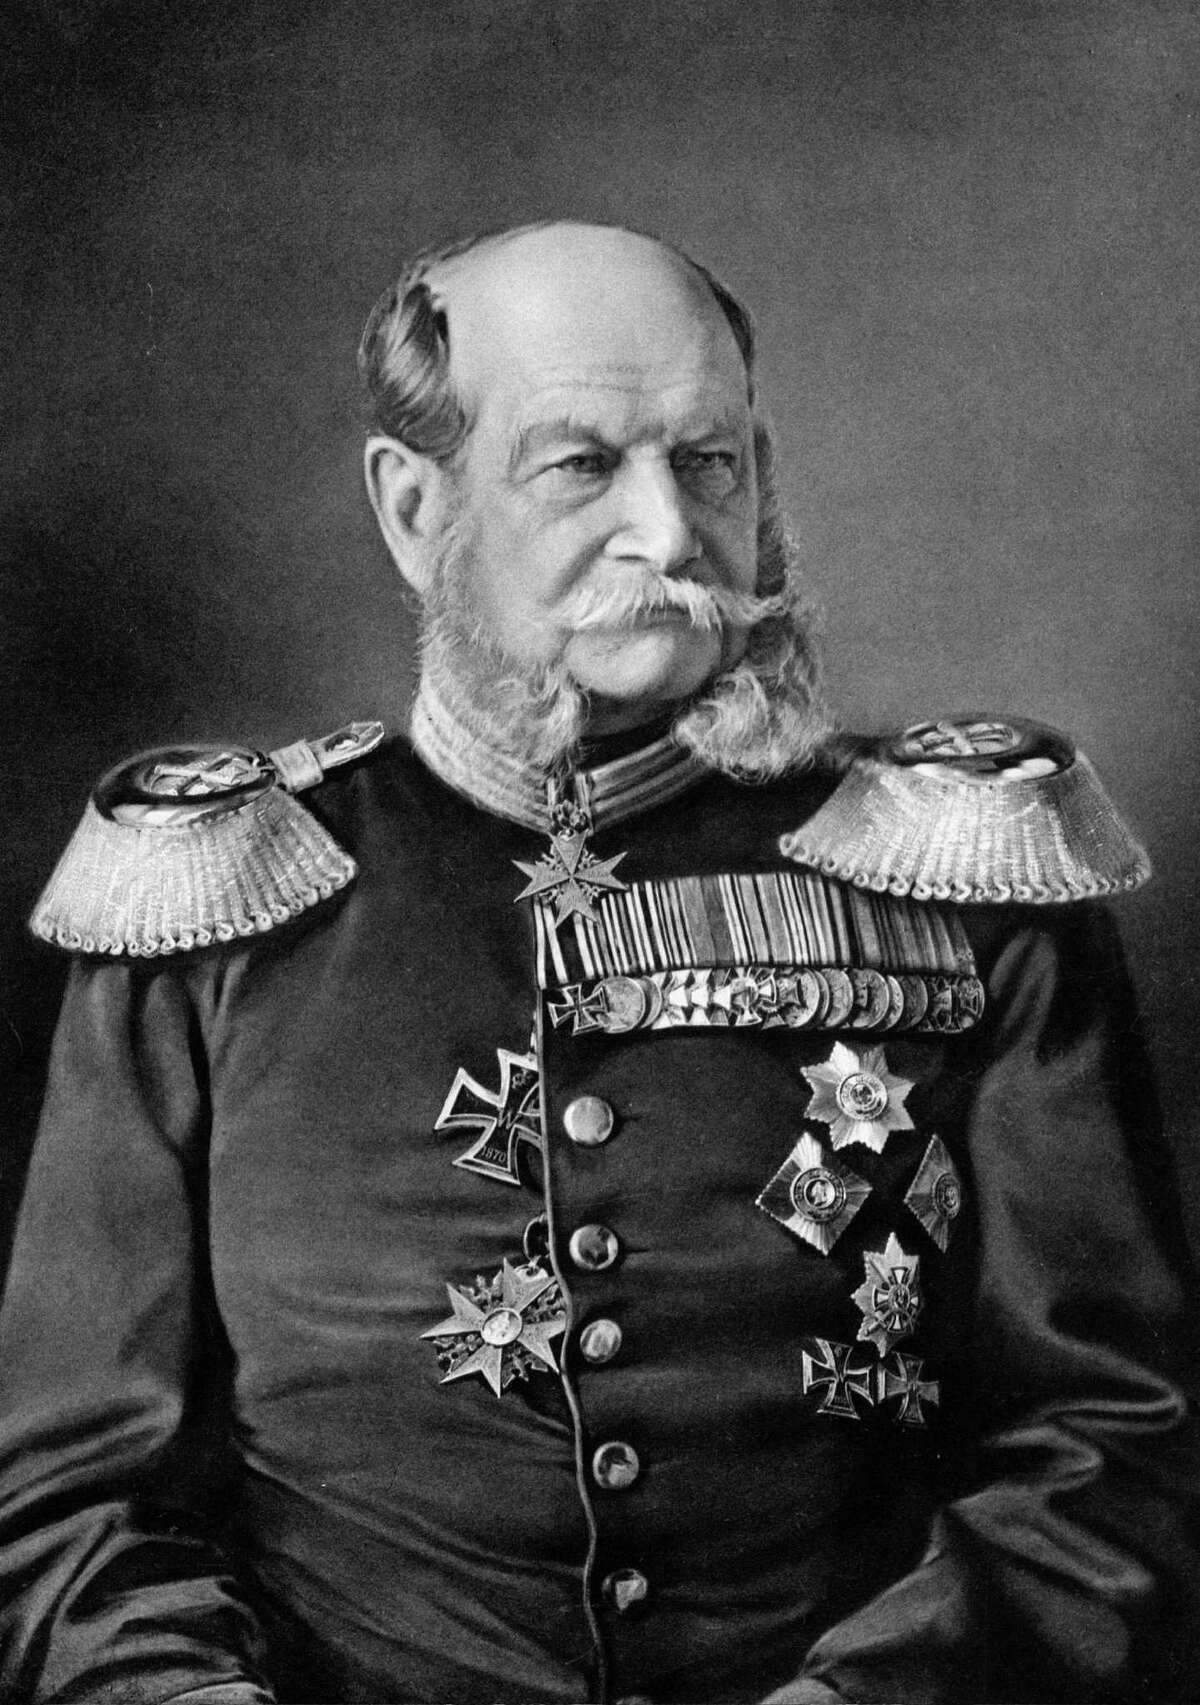 3. The area developed as the King William district when Ernst Altgel, a German immigrant who later became a businessman in San Antonio, named its main street after King Wilhelm I (pictured above), the king of Prussia in the 1870, according to the Texas State Historical Association.